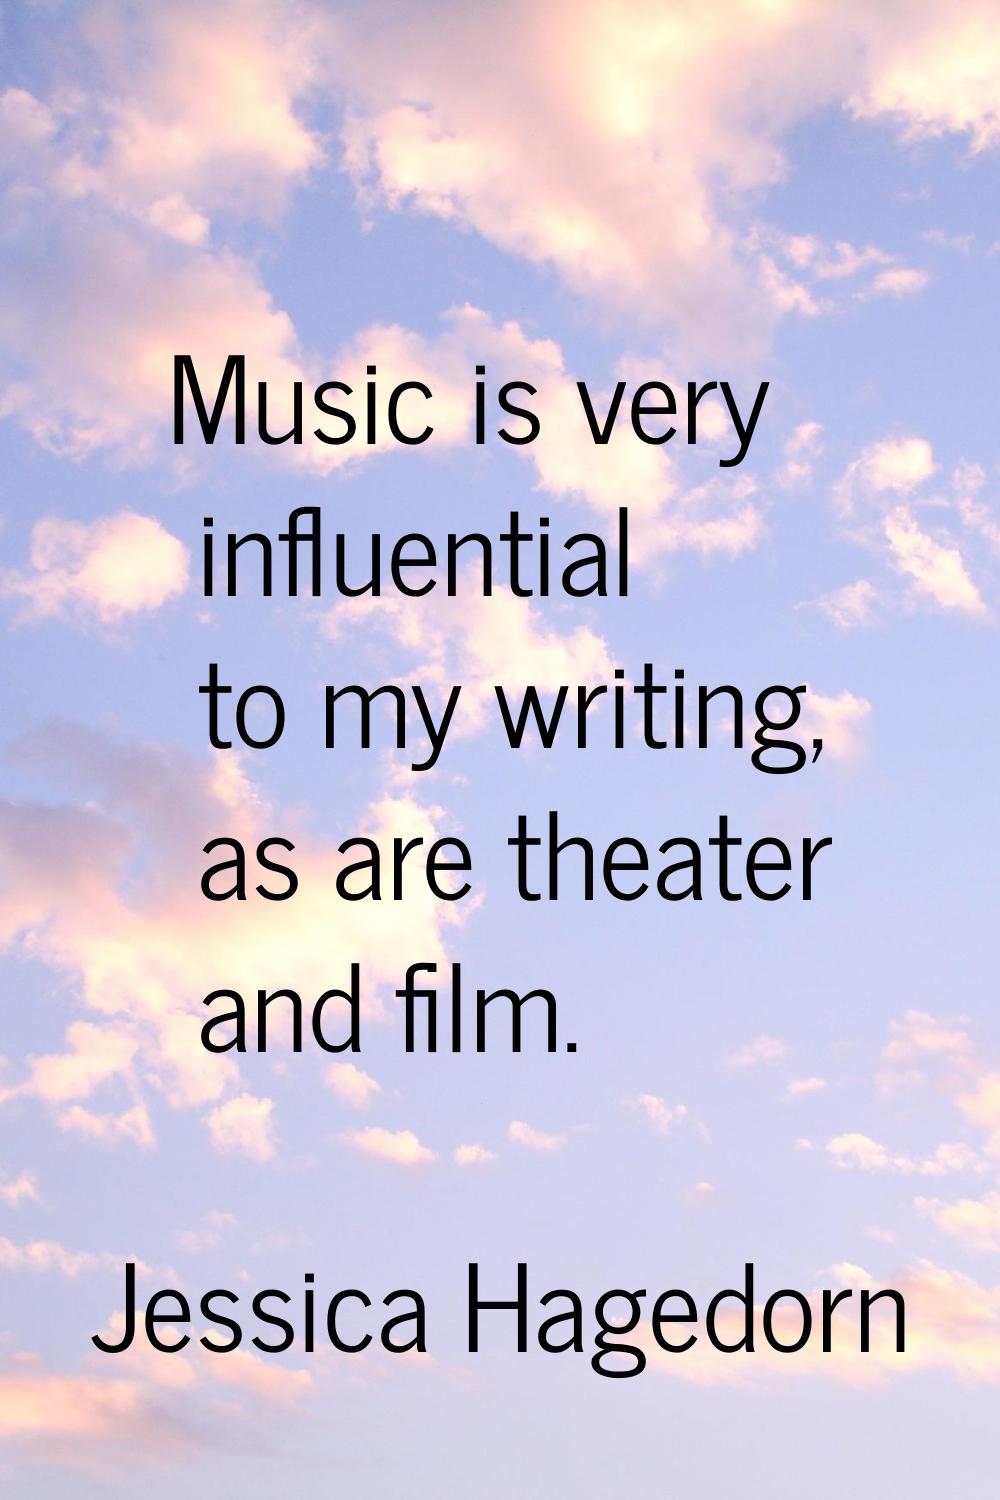 Music is very influential to my writing, as are theater and film.